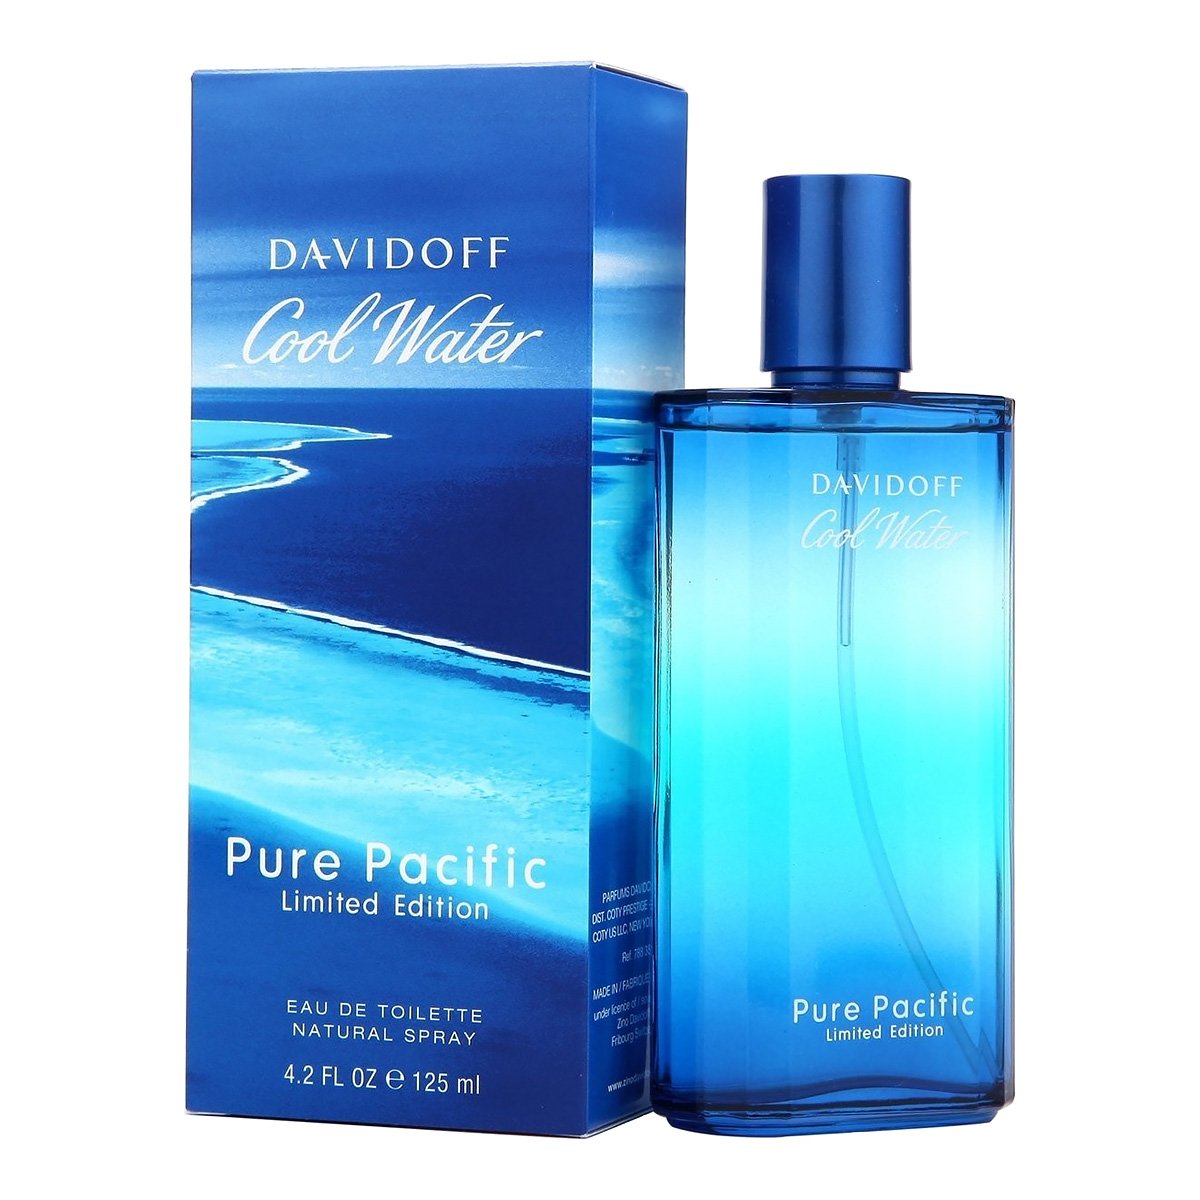 DAVIDOFF COOL WATER PURE PACIFIC FOR HIM